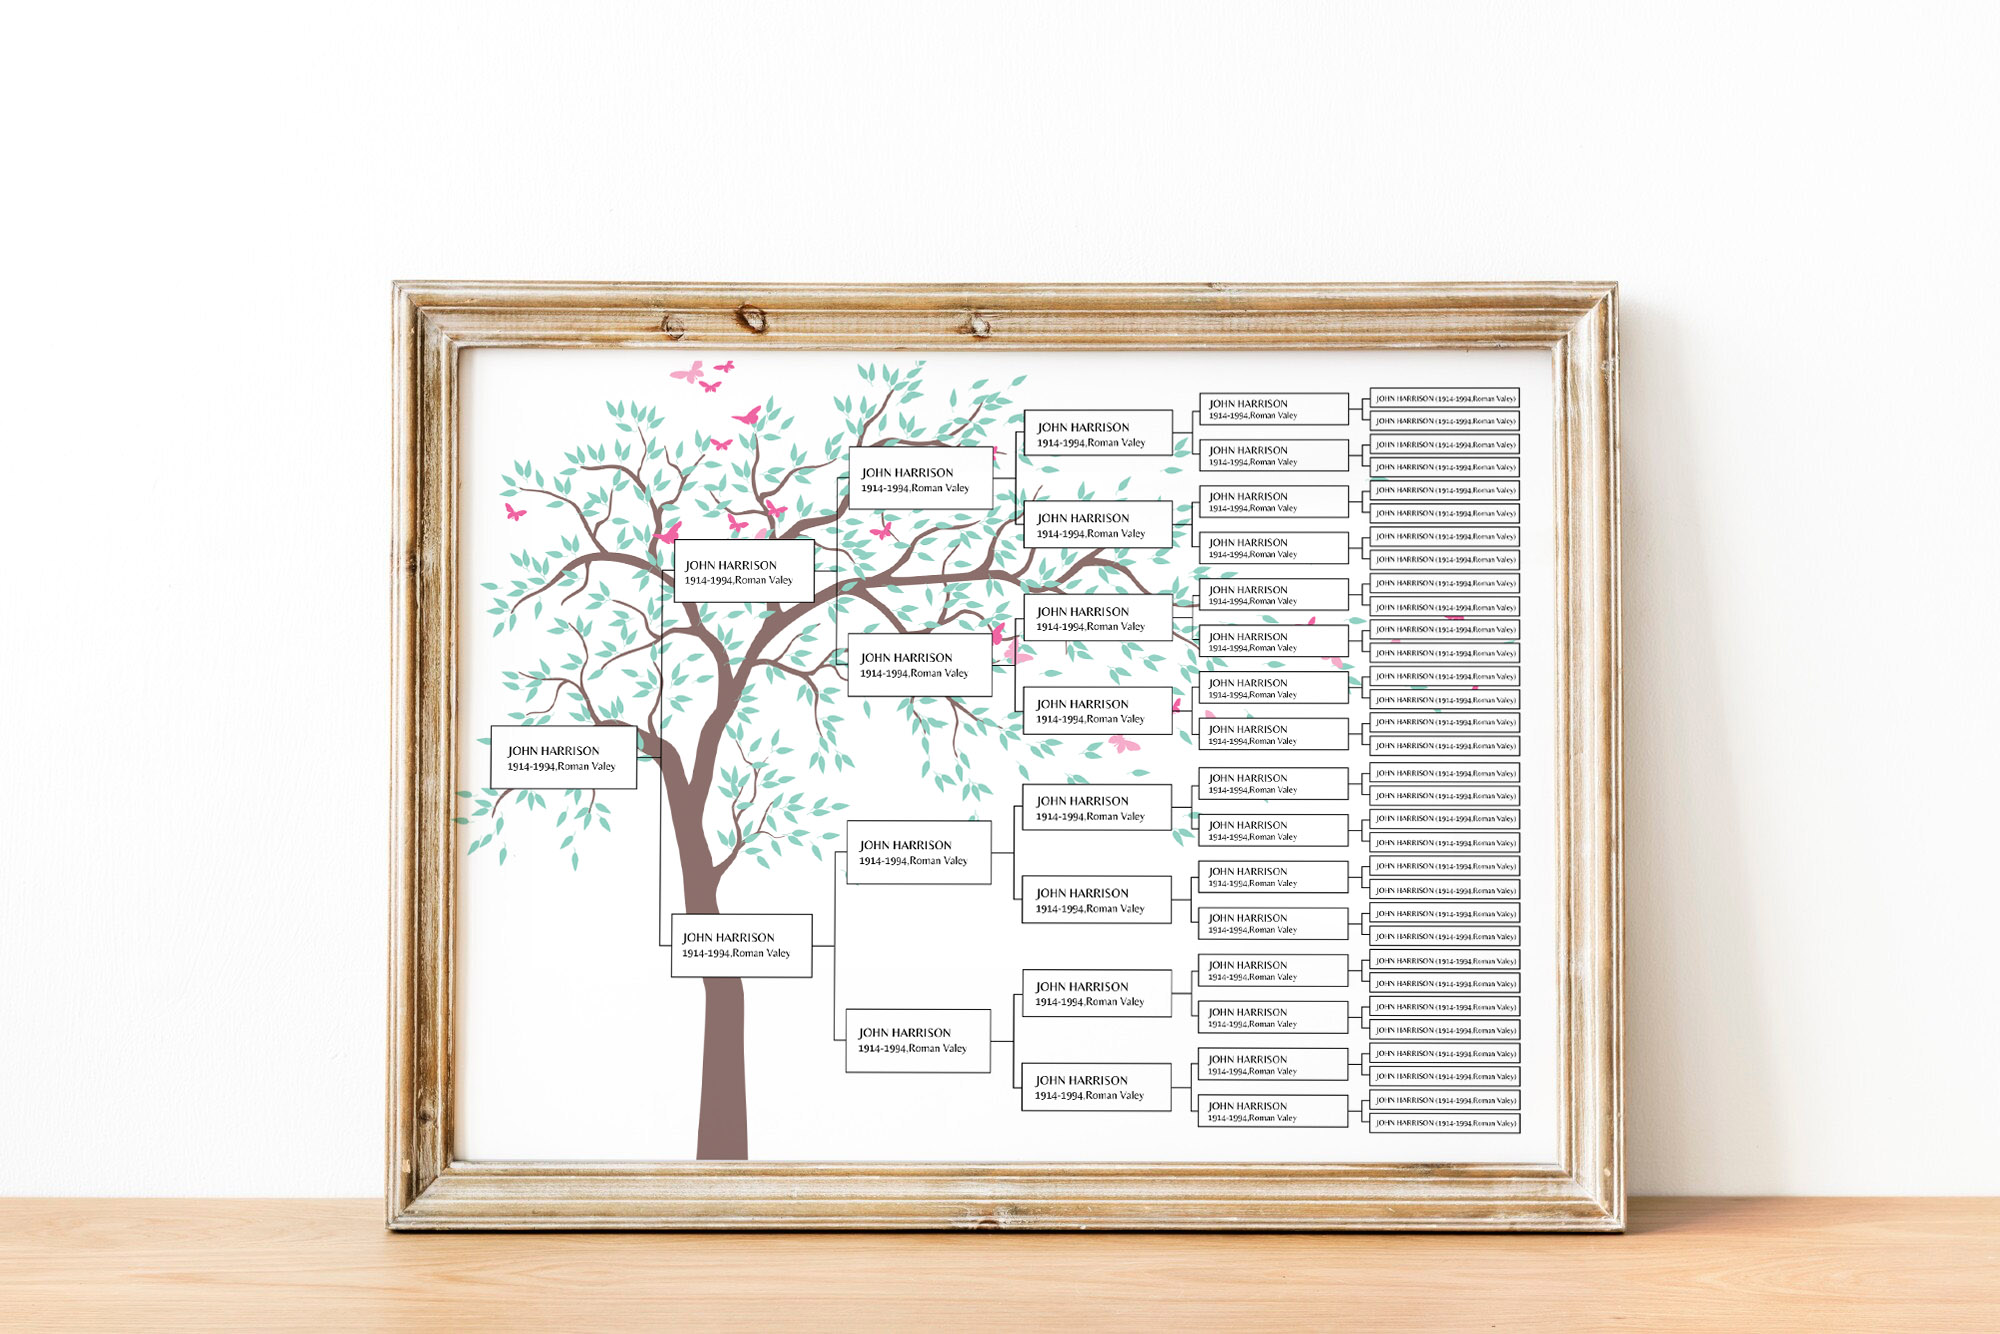 Buy Ancestry Book Template Family Tree Family History and